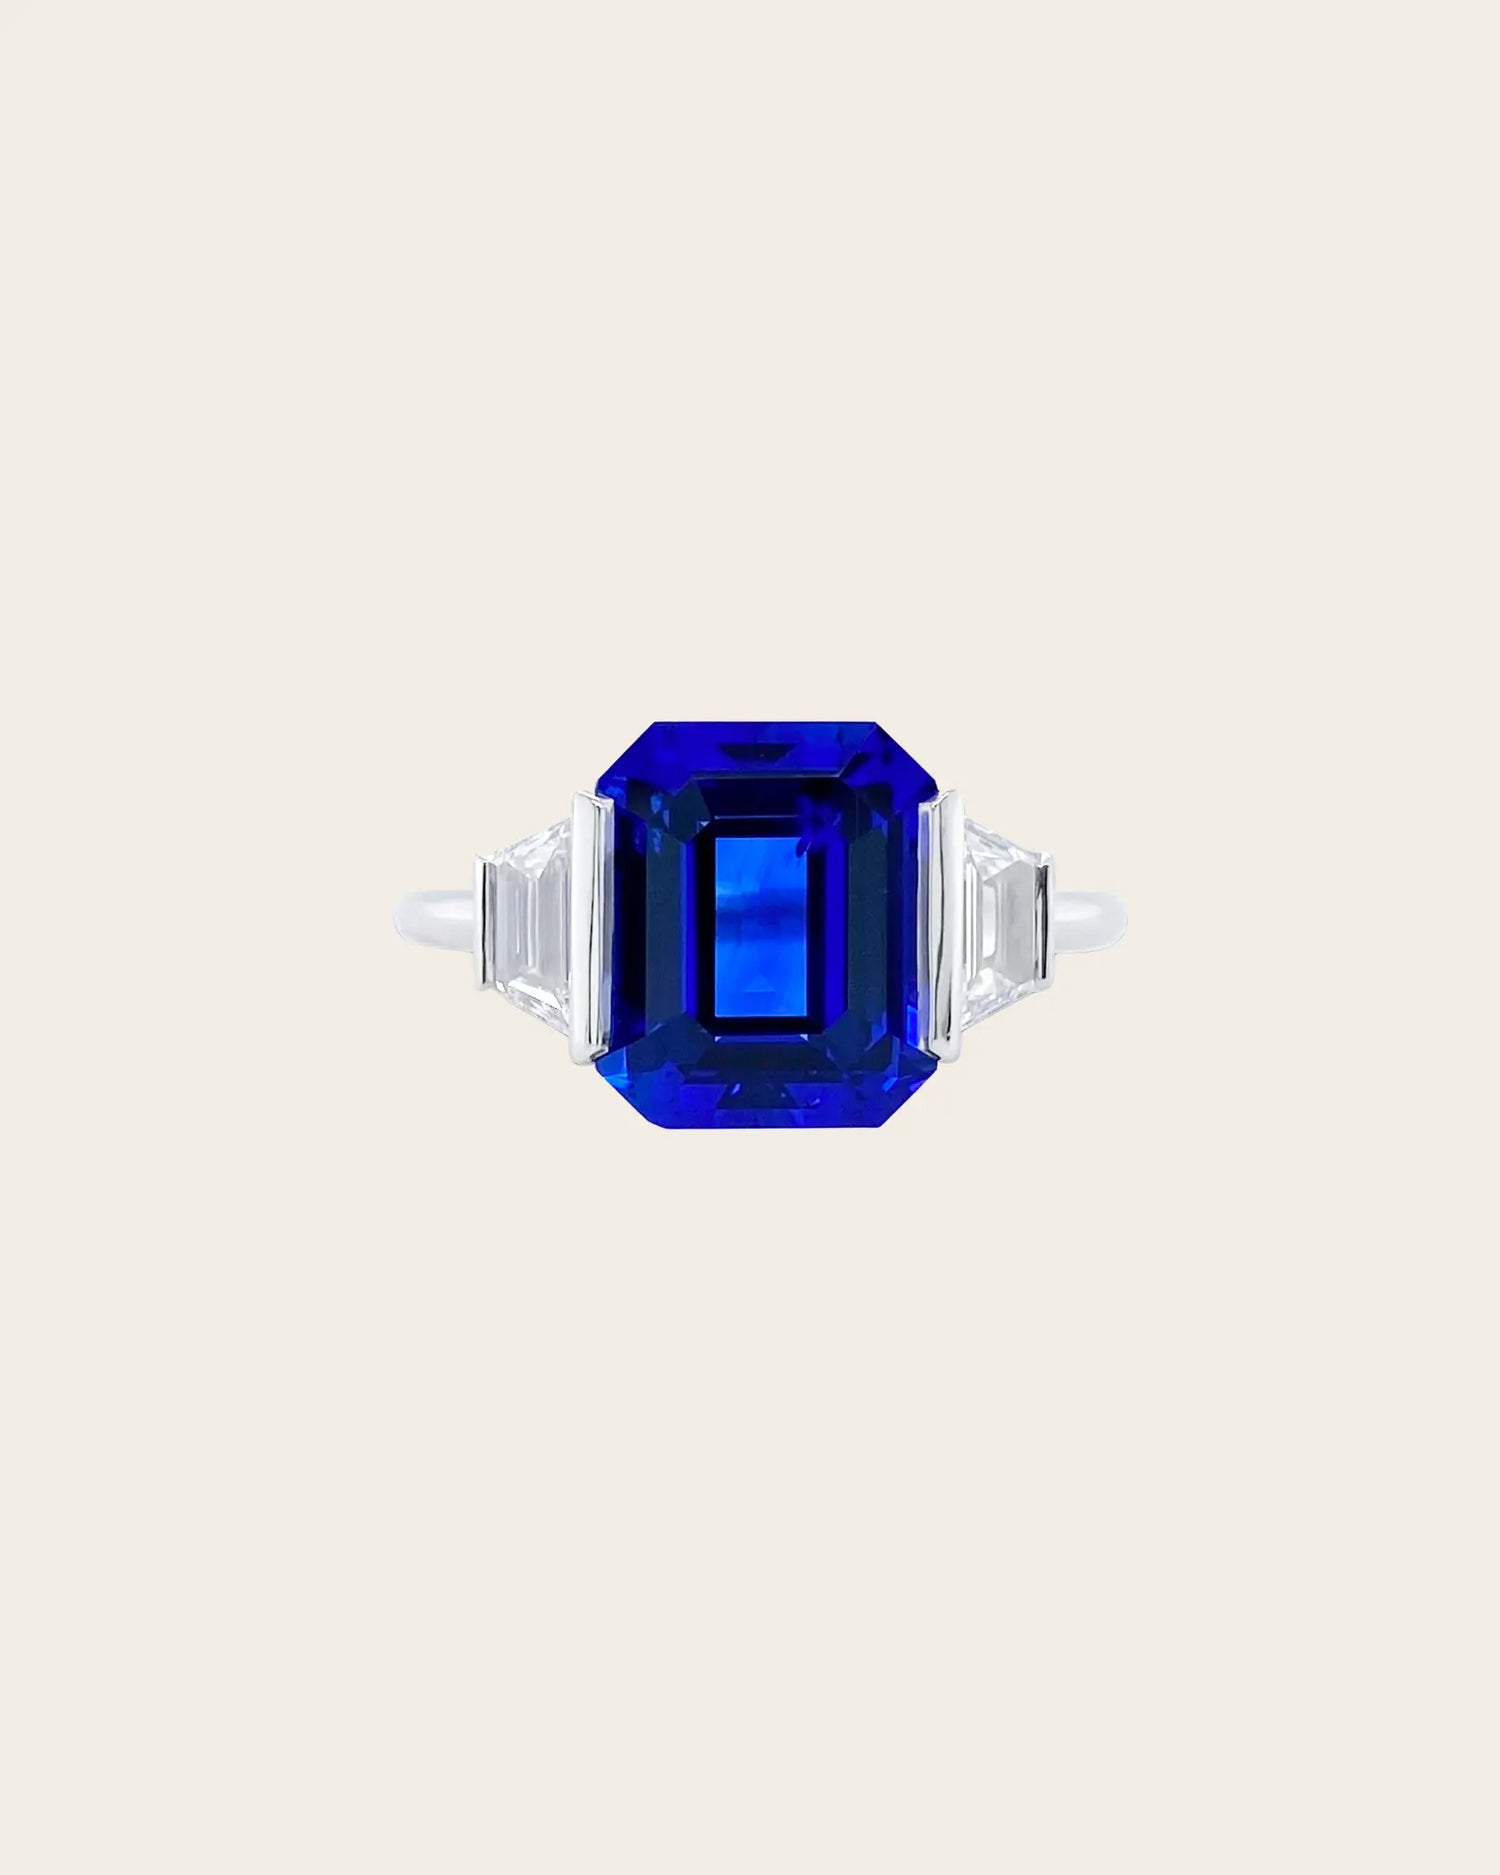 One of a Kind Blue Sapphire Ring One of a Kind Blue Sapphire Ring Bayco Bayco  Squash Blossom Vail